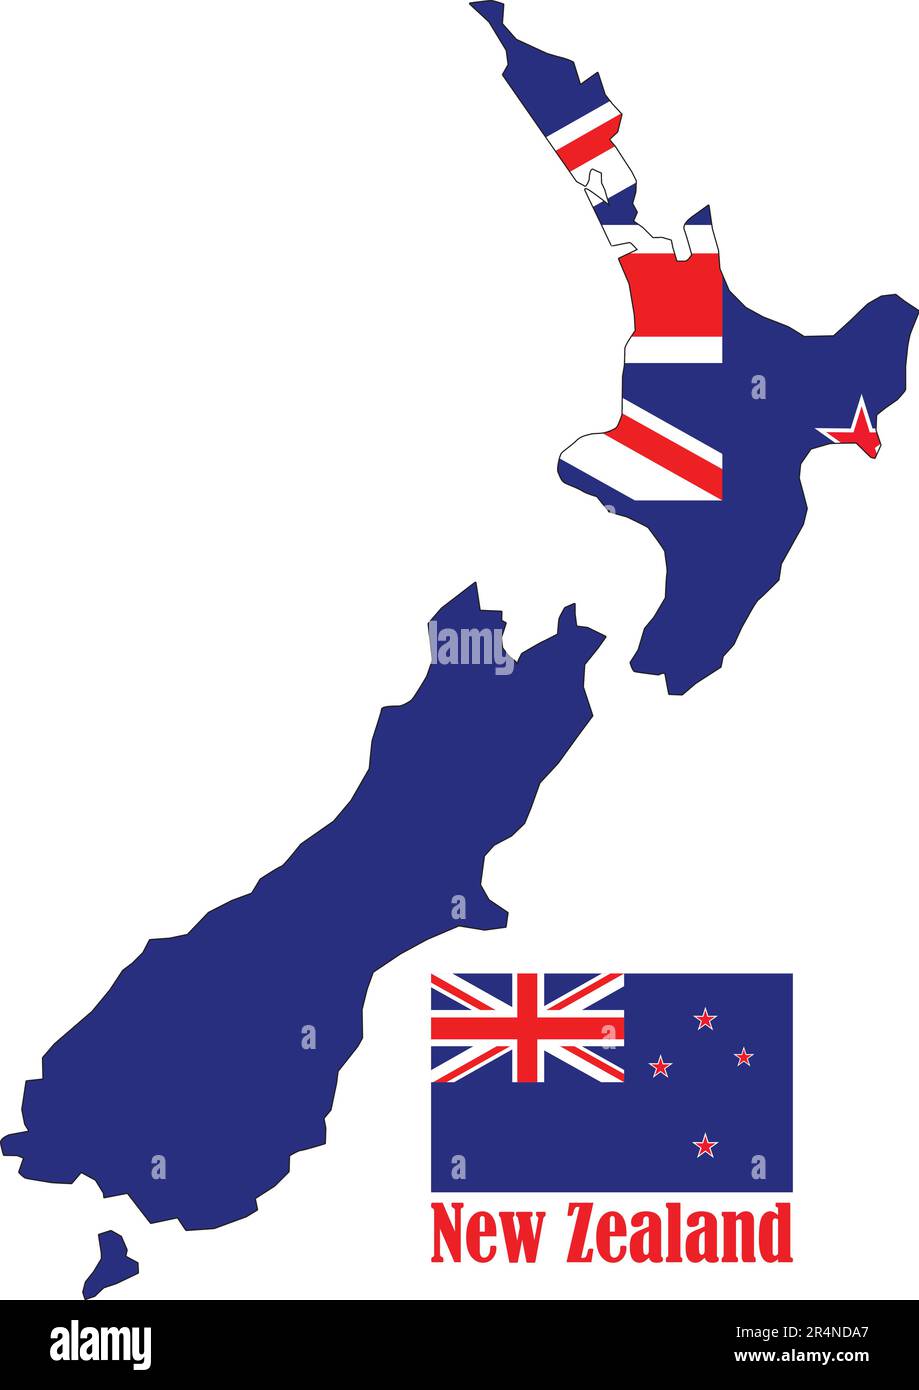 New Zealand Map and Flag Stock Vector